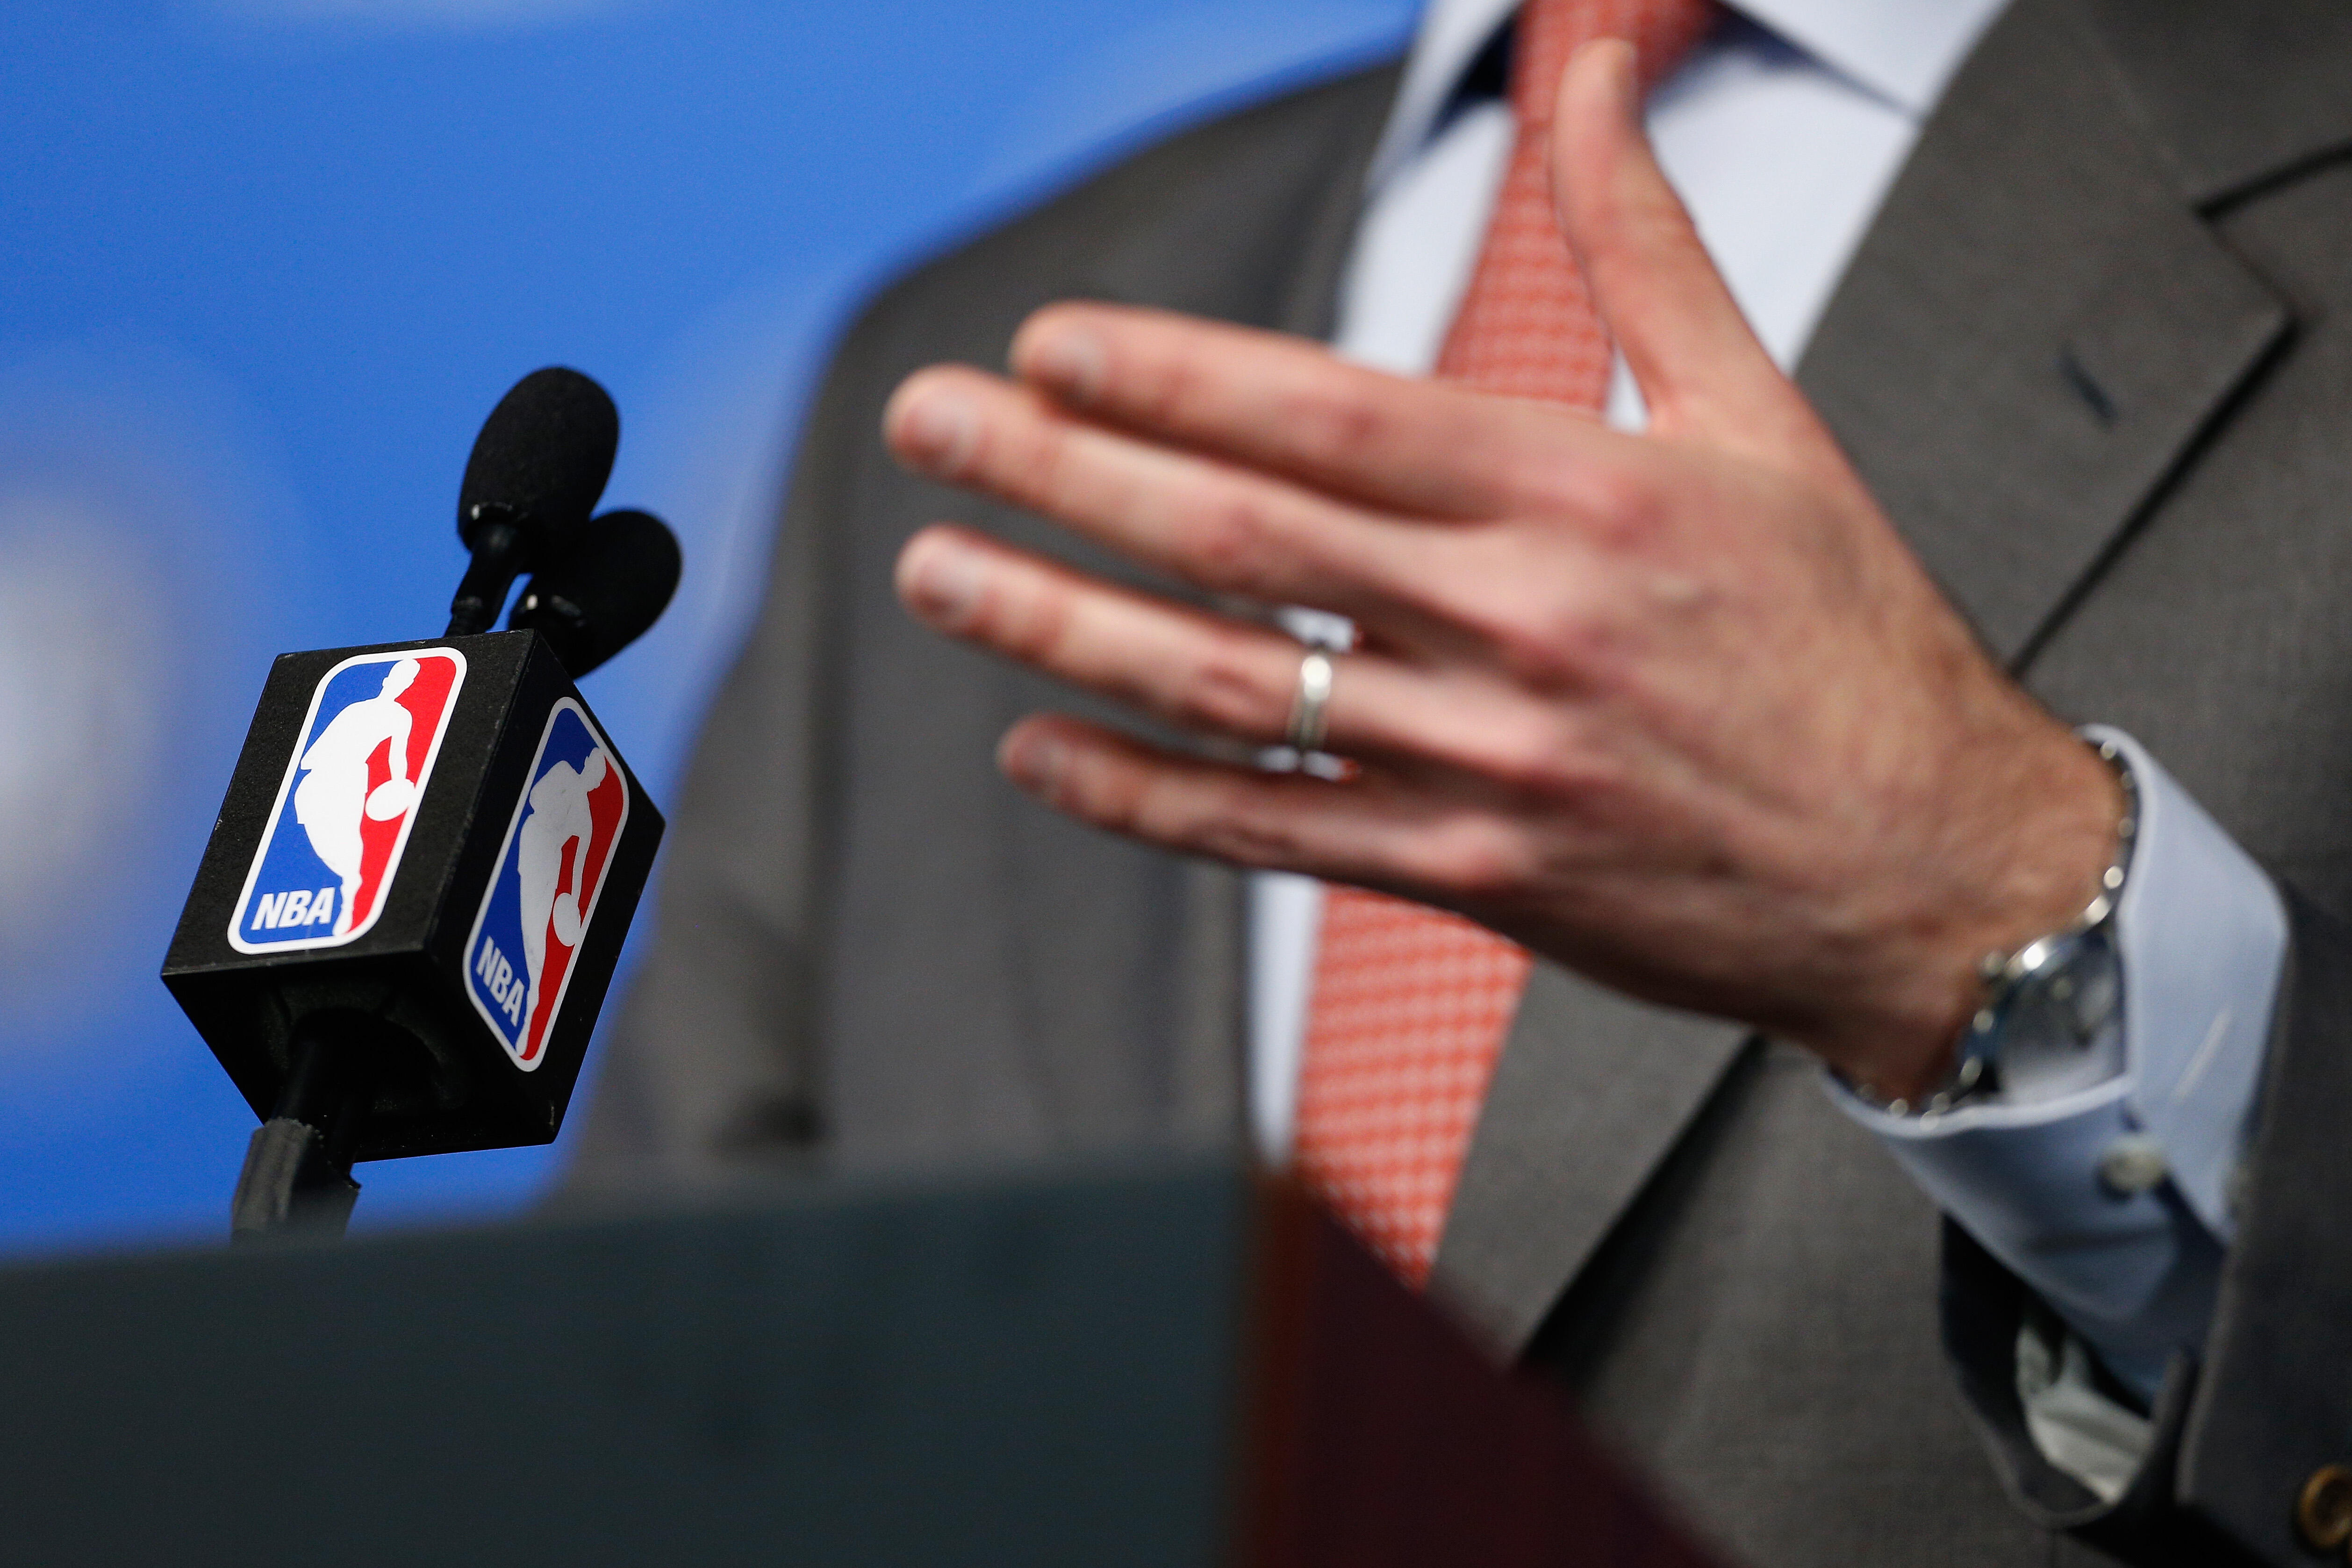 NEW ORLEANS, LA - FEBRUARY 18:  A detailed view of the microphone as NBA Commissioner Adam Silver speaks with the media during a press conference at Smoothie King Center on February 18, 2017 in New Orleans, Louisiana. NOTE TO USER: User expressly acknowle